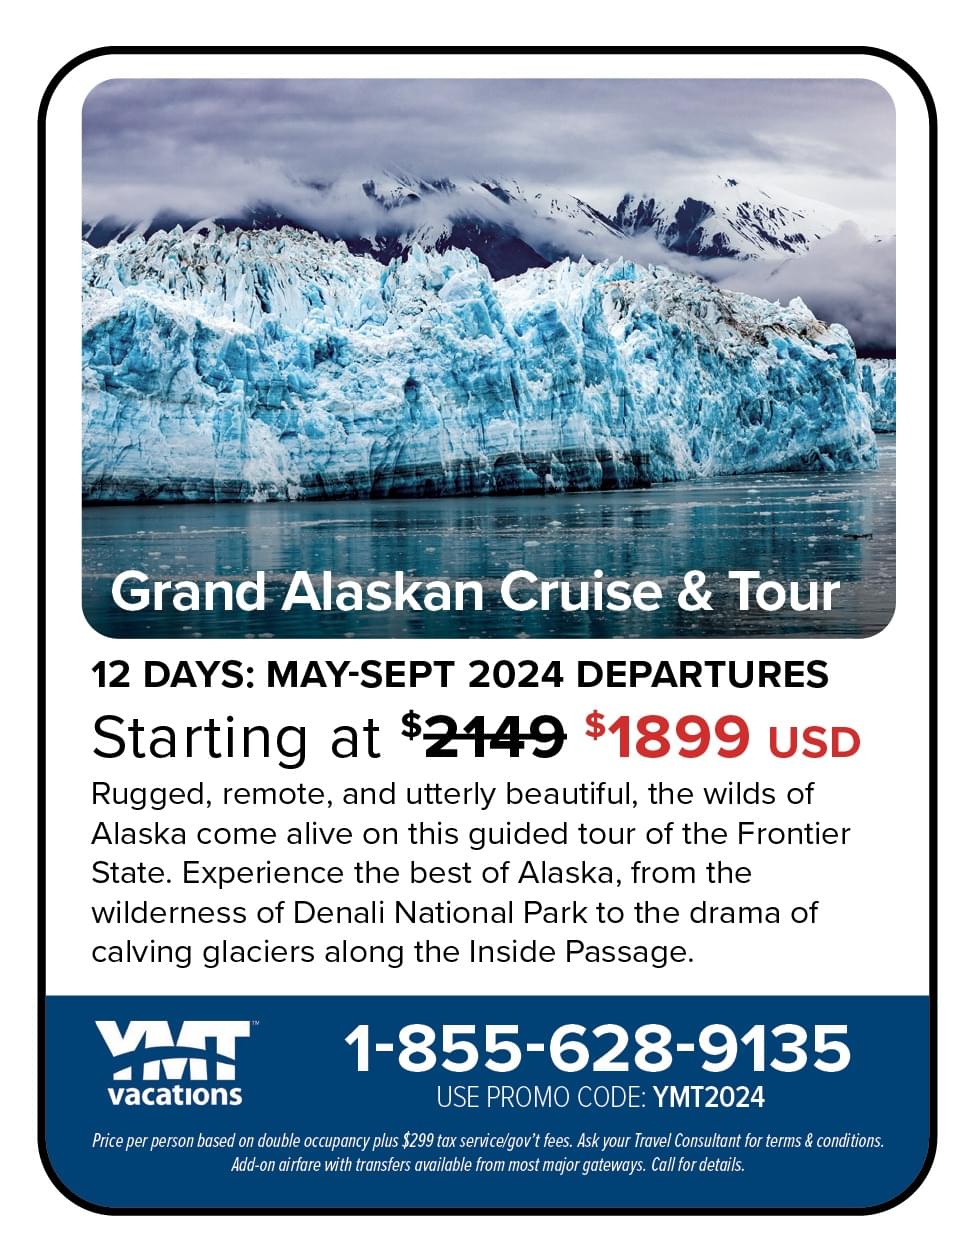 Grand Alaskan Cruise Tour from YMT Vacations